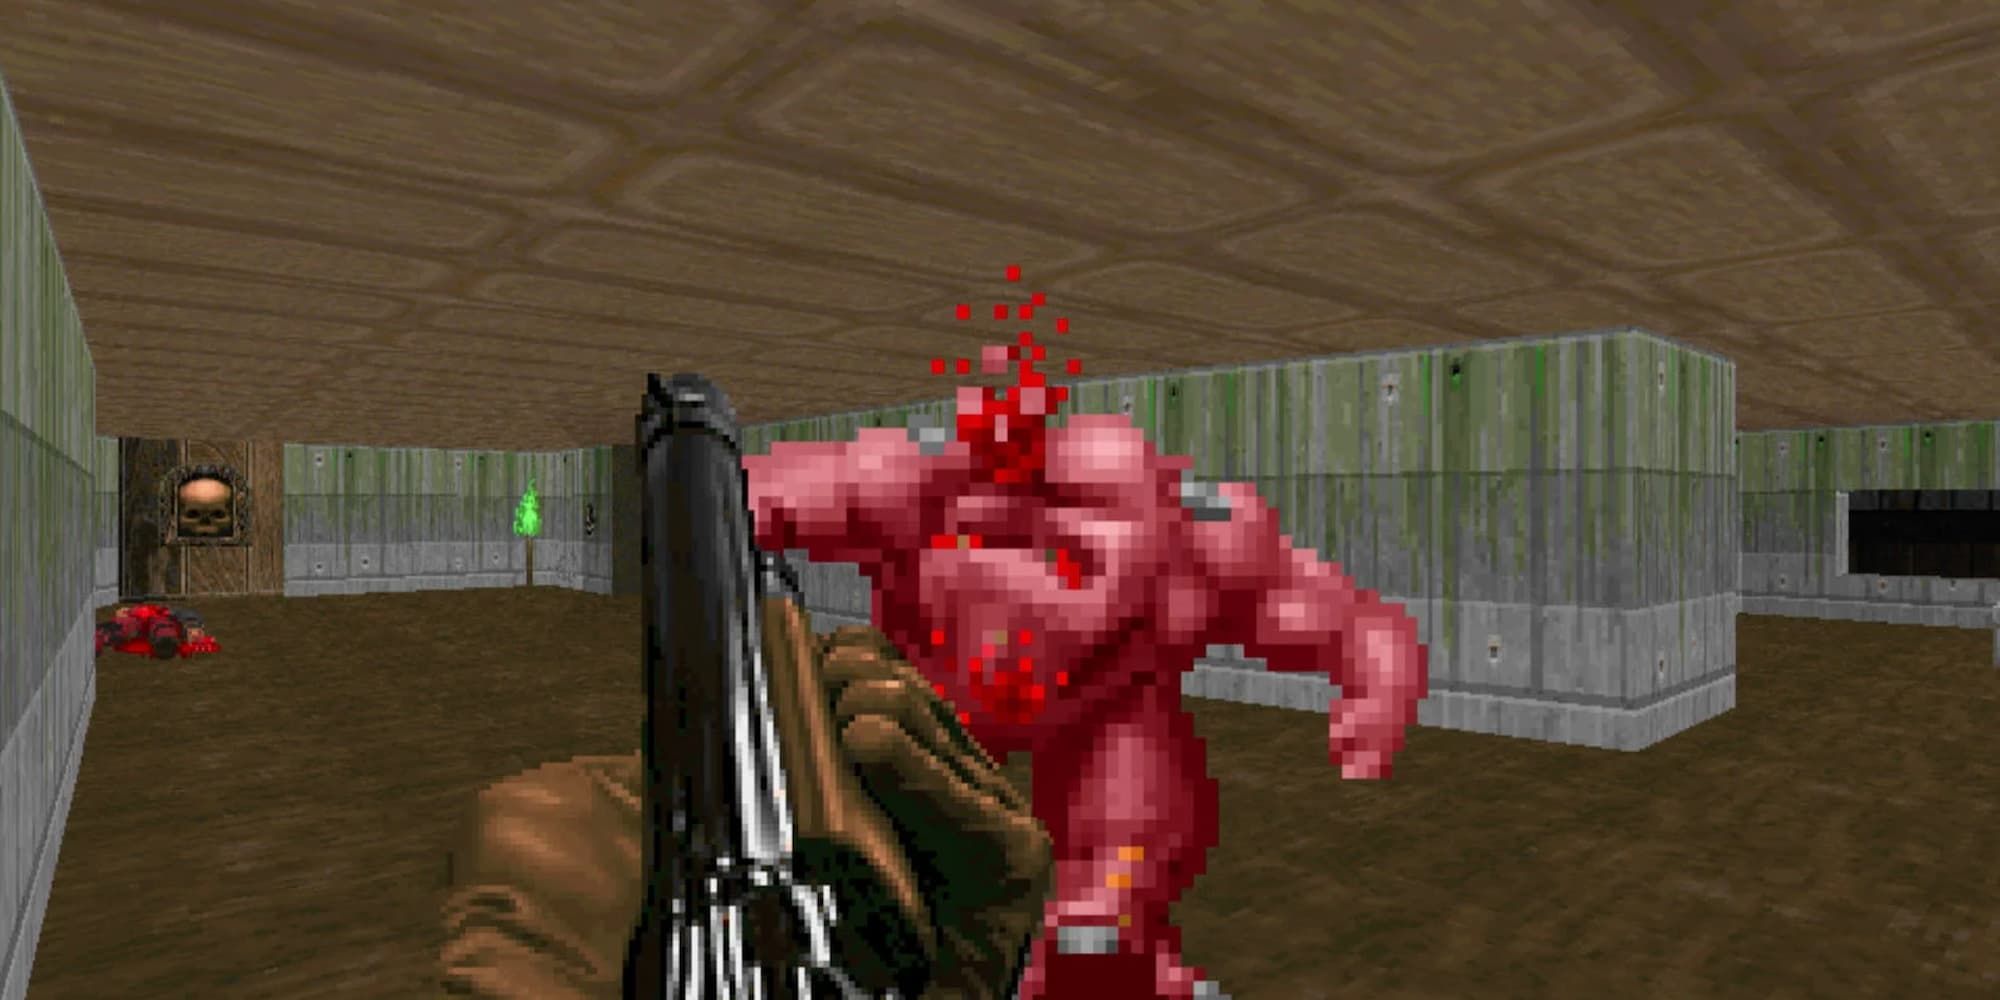 The player shoots a monster with a shotgun in the original Doom.